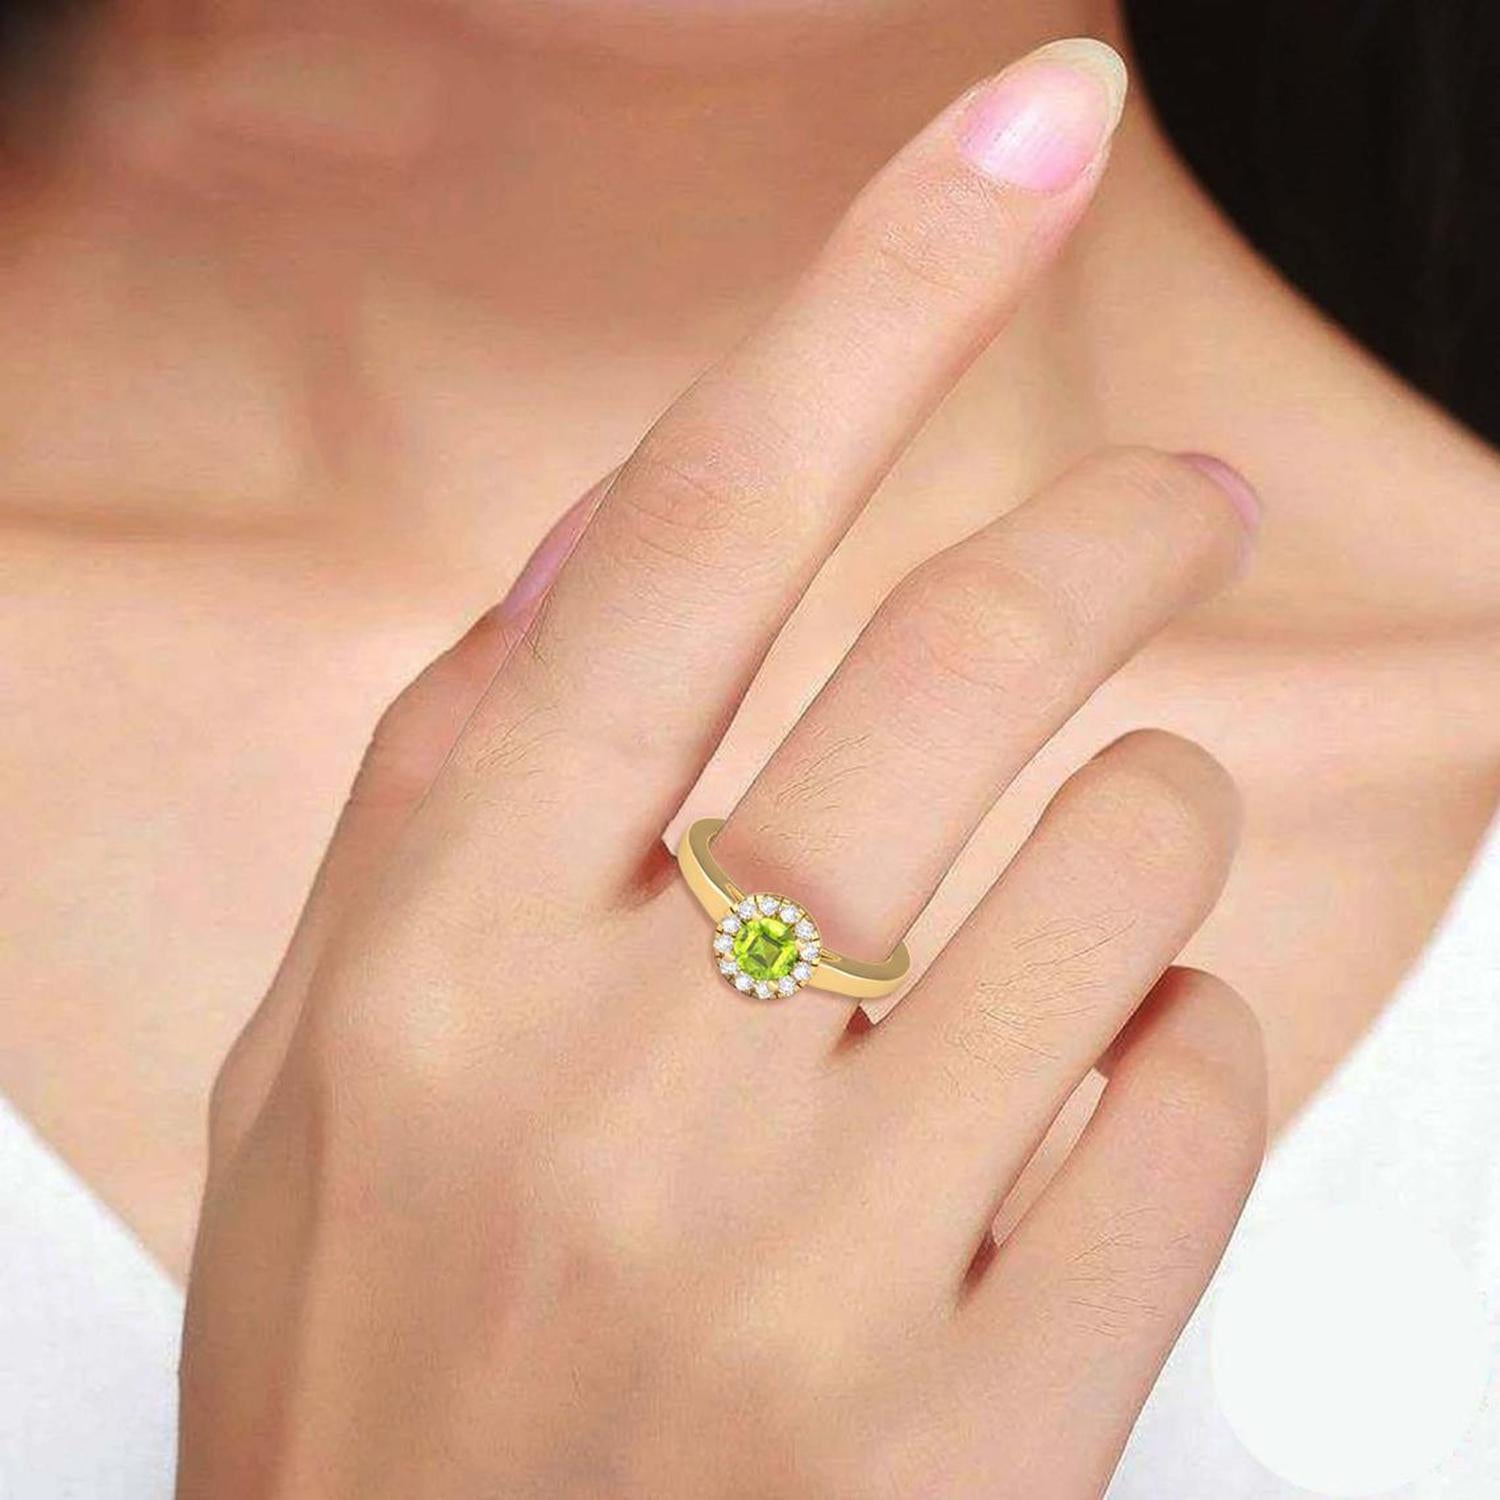 Women's 14 Karat Gold 5MM Round Peridot Ring / 1.5MM Round Diamond Ring / Solitaire Ring For Sale